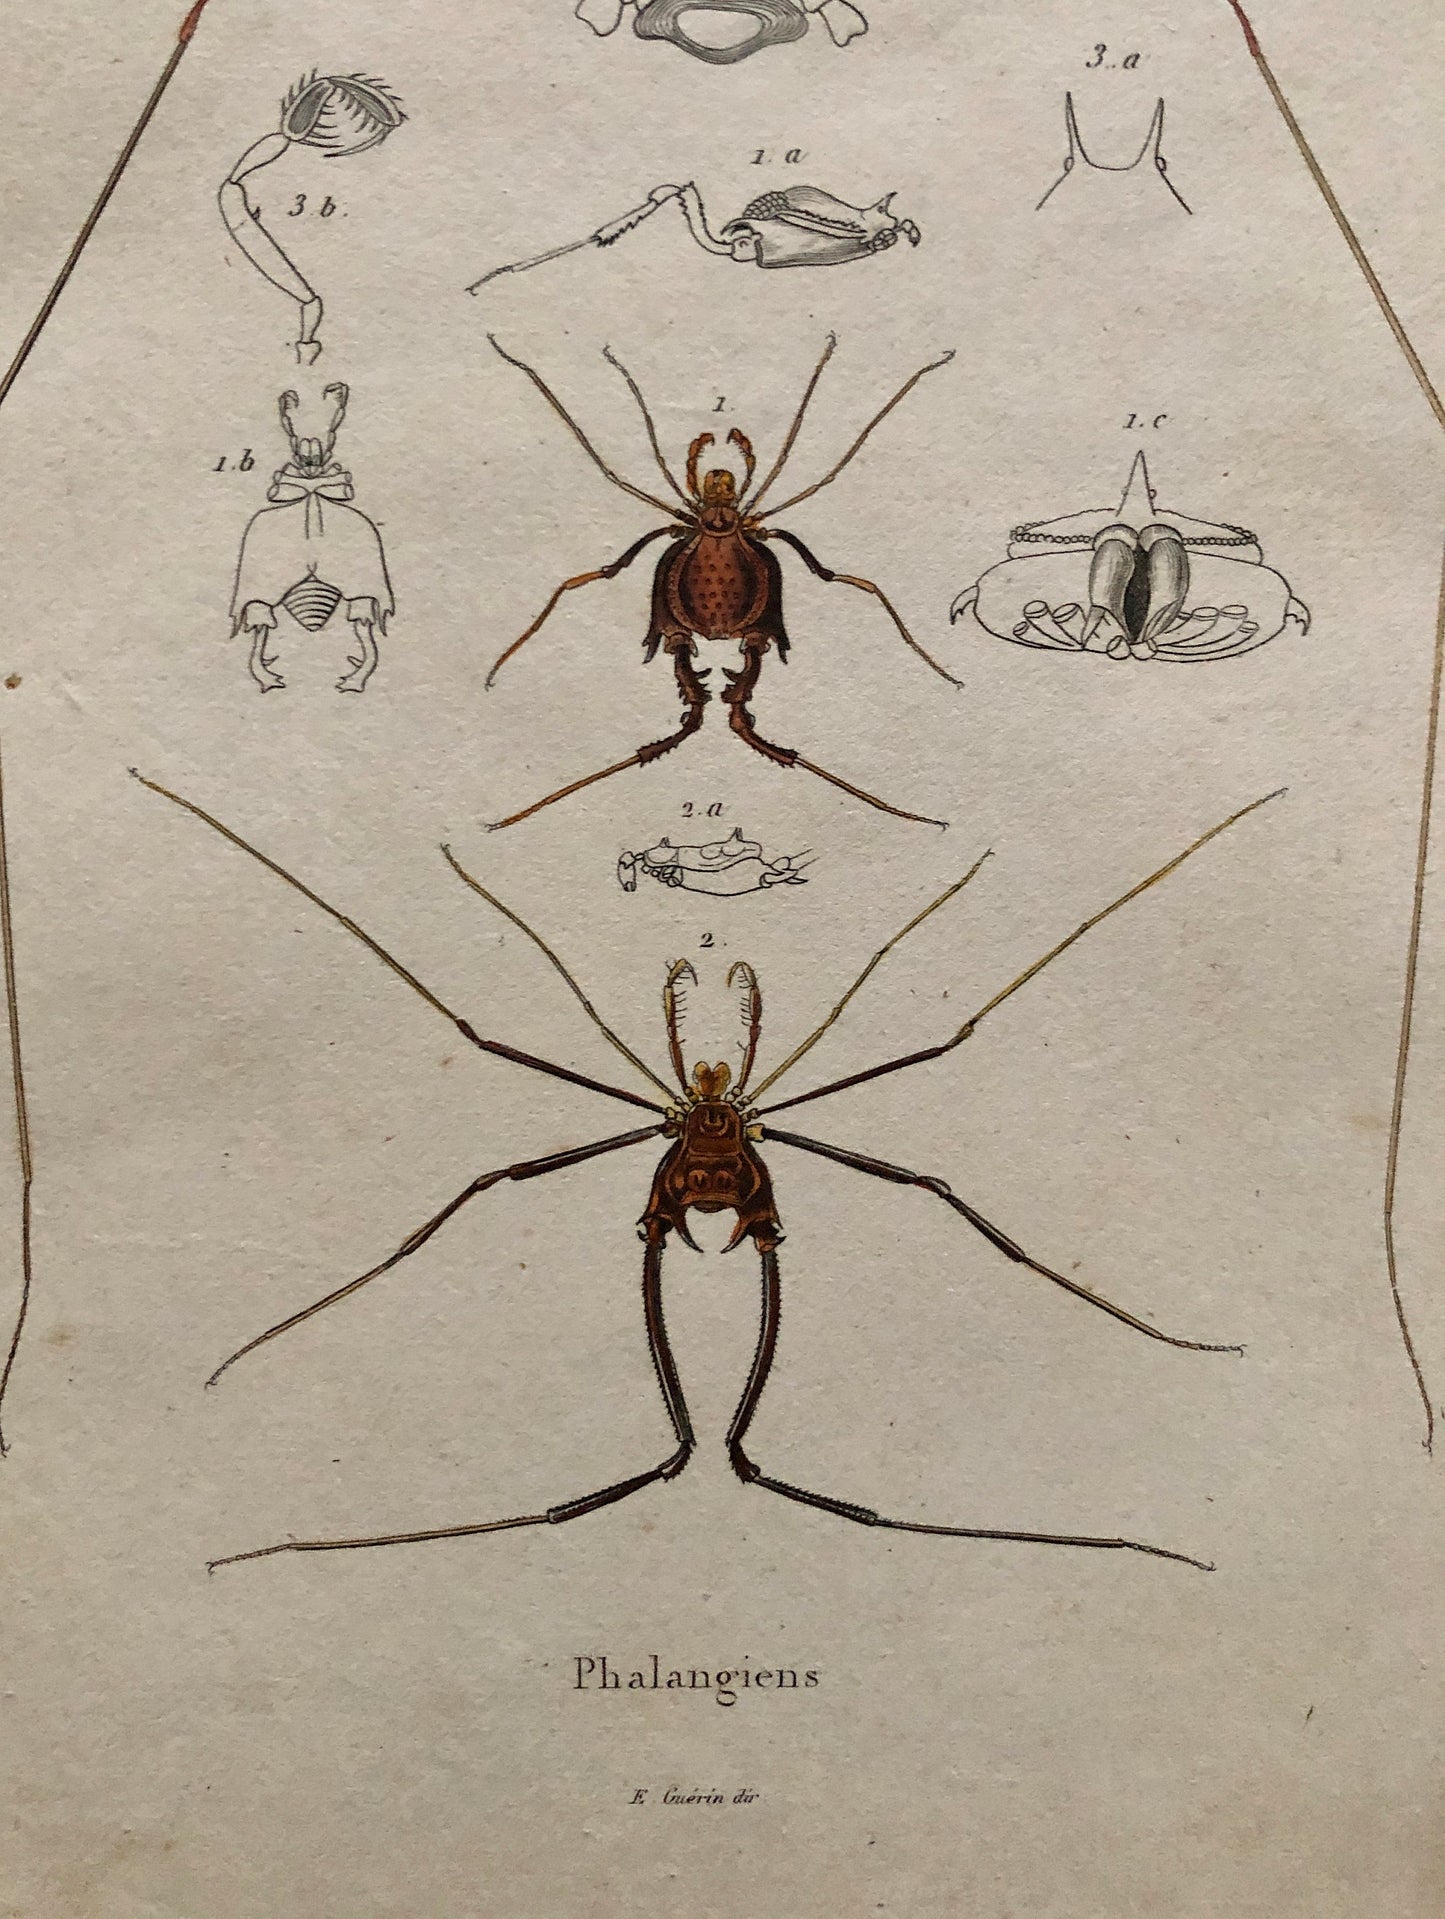 Three Antique Steel Engravings by E. Guérin. From a French Dictionary. Featuring Various Types of Spider and A Flea. Size: 29 x 18 cms.